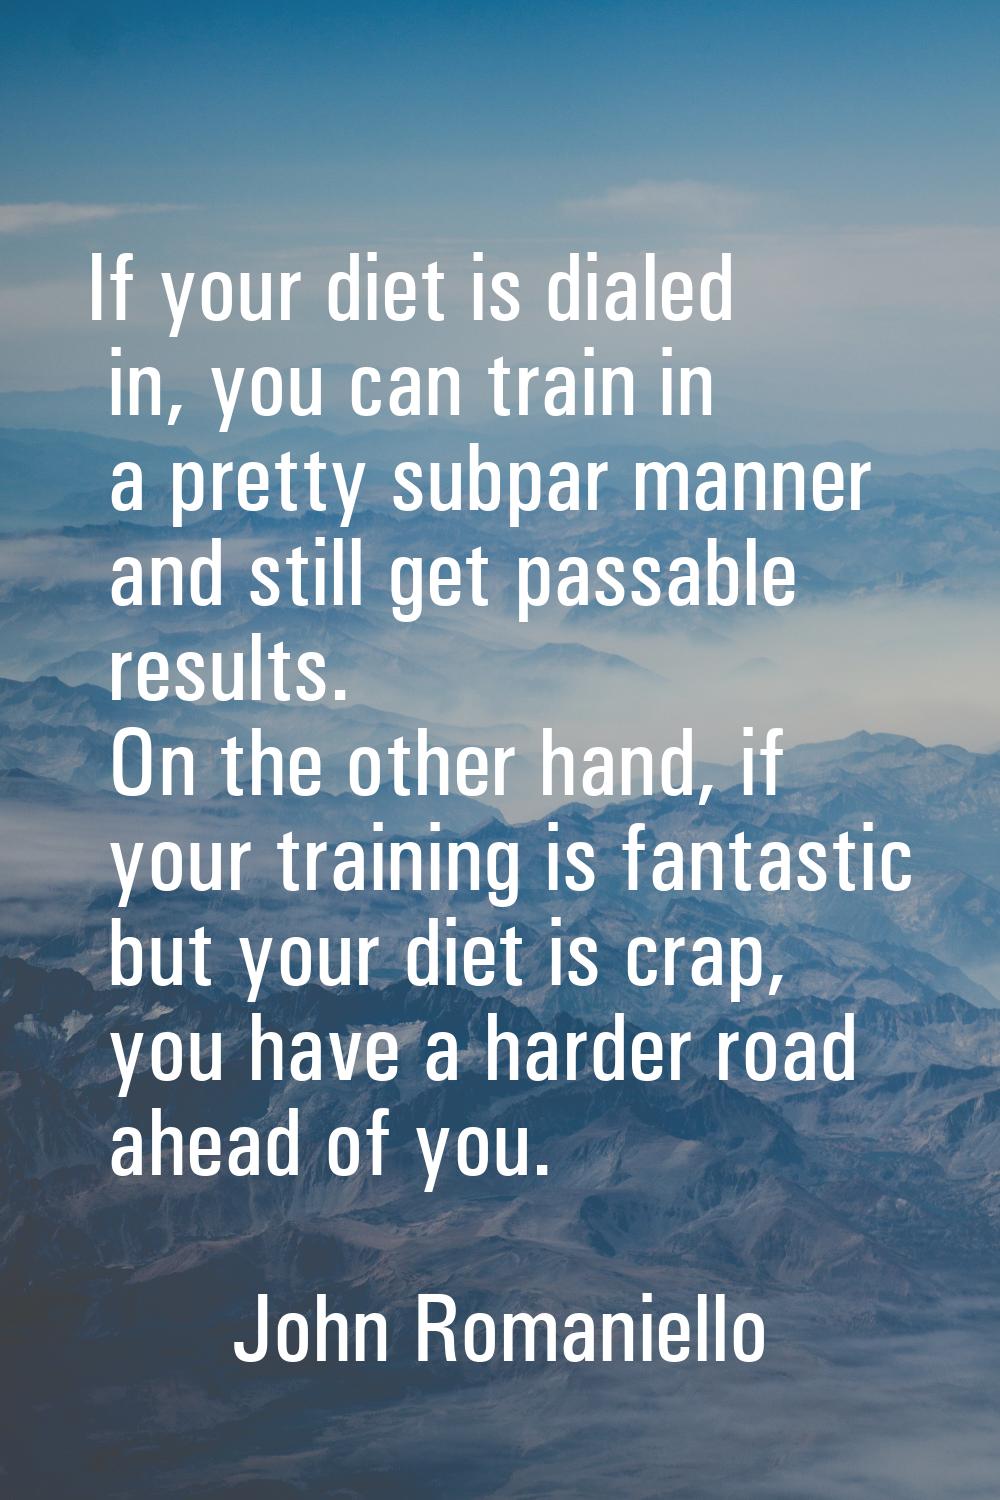 If your diet is dialed in, you can train in a pretty subpar manner and still get passable results. 